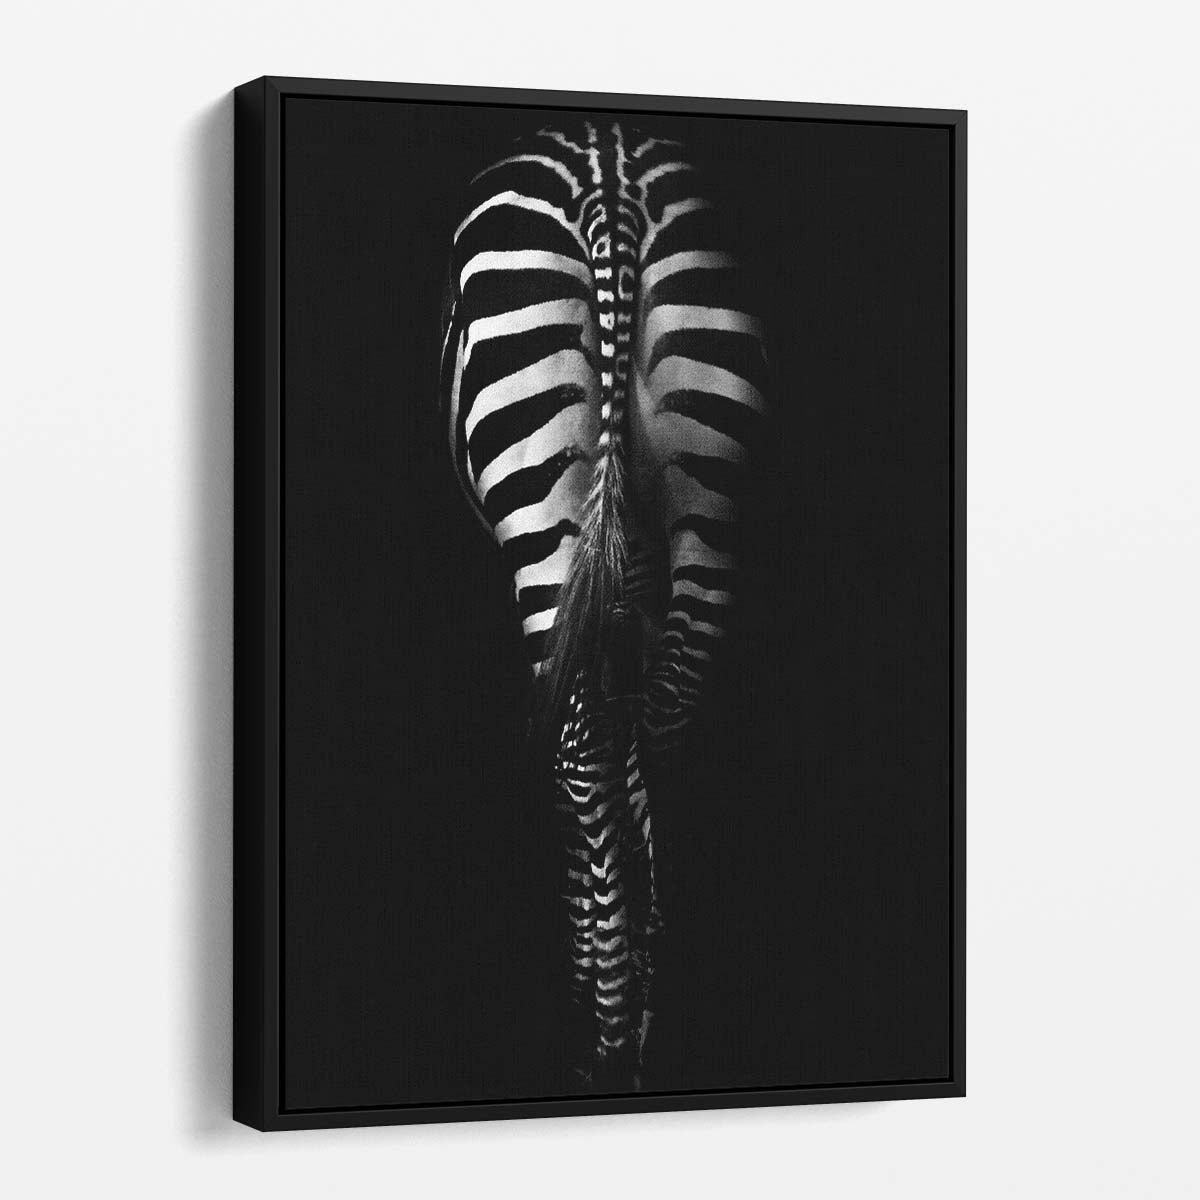 Minimalistic Black and White Zebra Tail Stripe Photography Art by Luxuriance Designs, made in USA